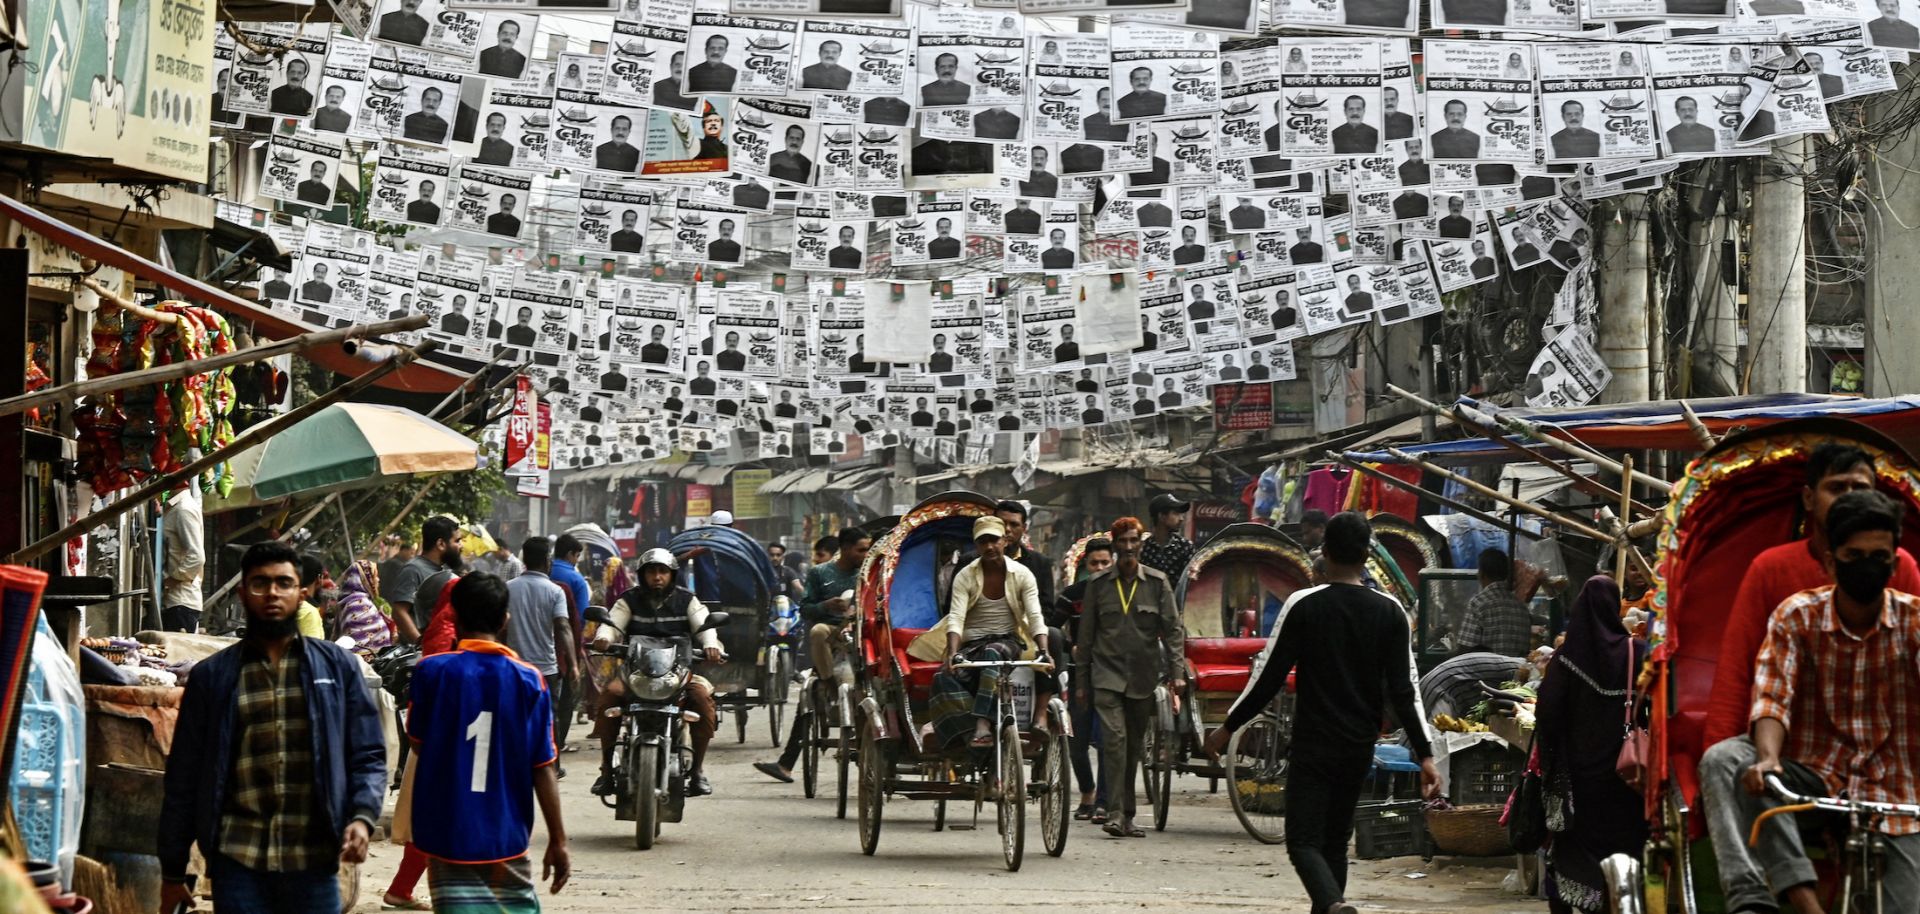 Posters of Bangladesh's election candidates hang over a street in Dhaka on Dec. 26, 2023, ahead of the 2024 general elections.